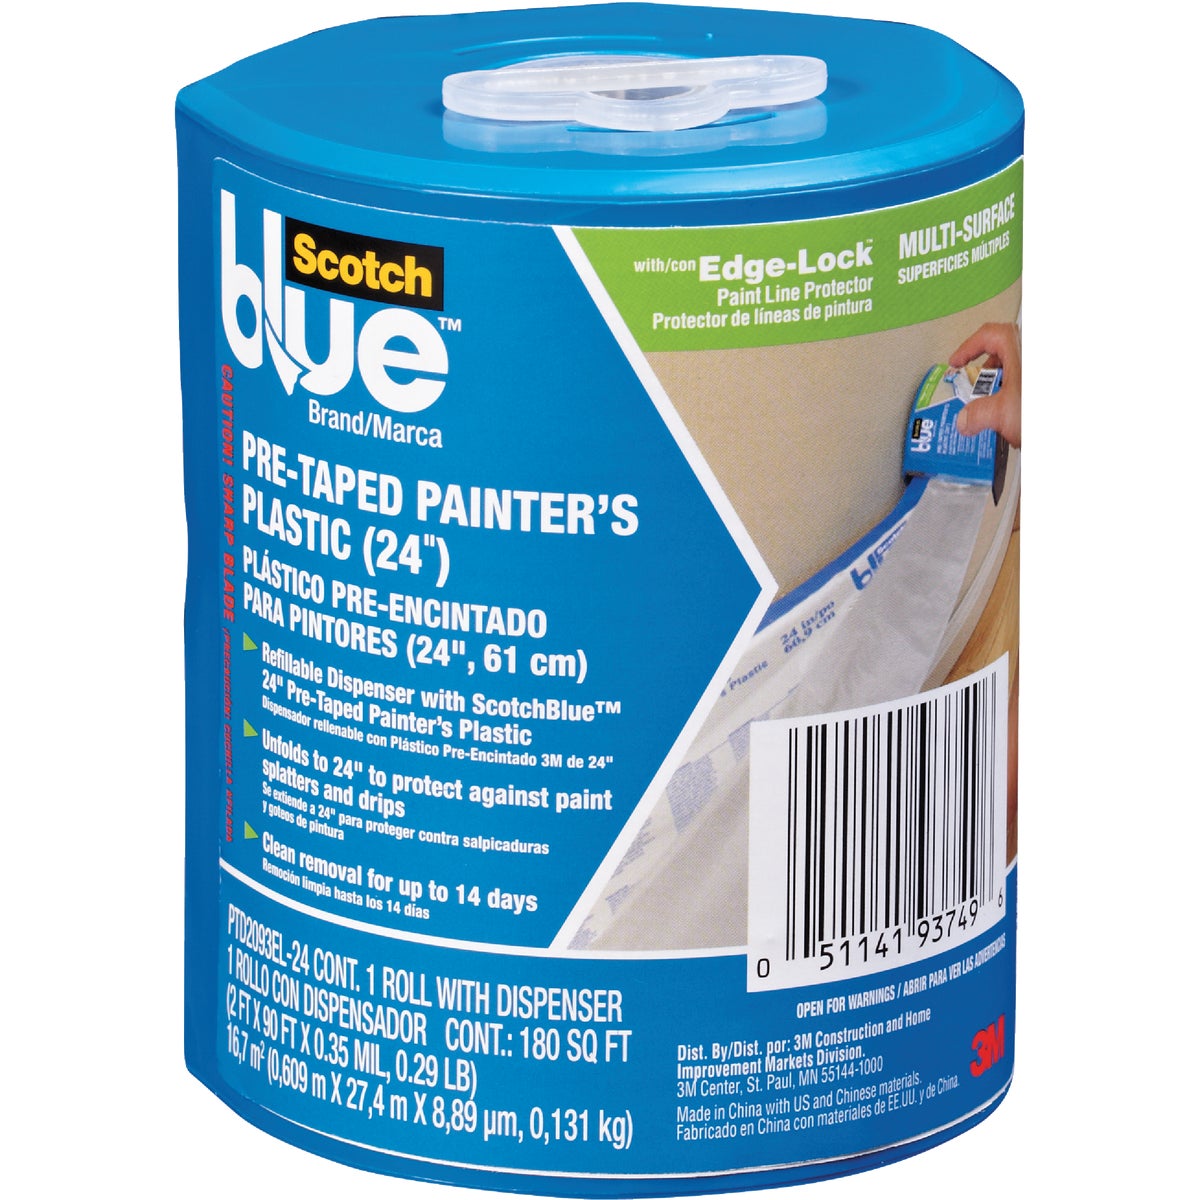 Item 770870, ScotchBlue Tape + Plastic with Dispenser helps you prepare and protect your